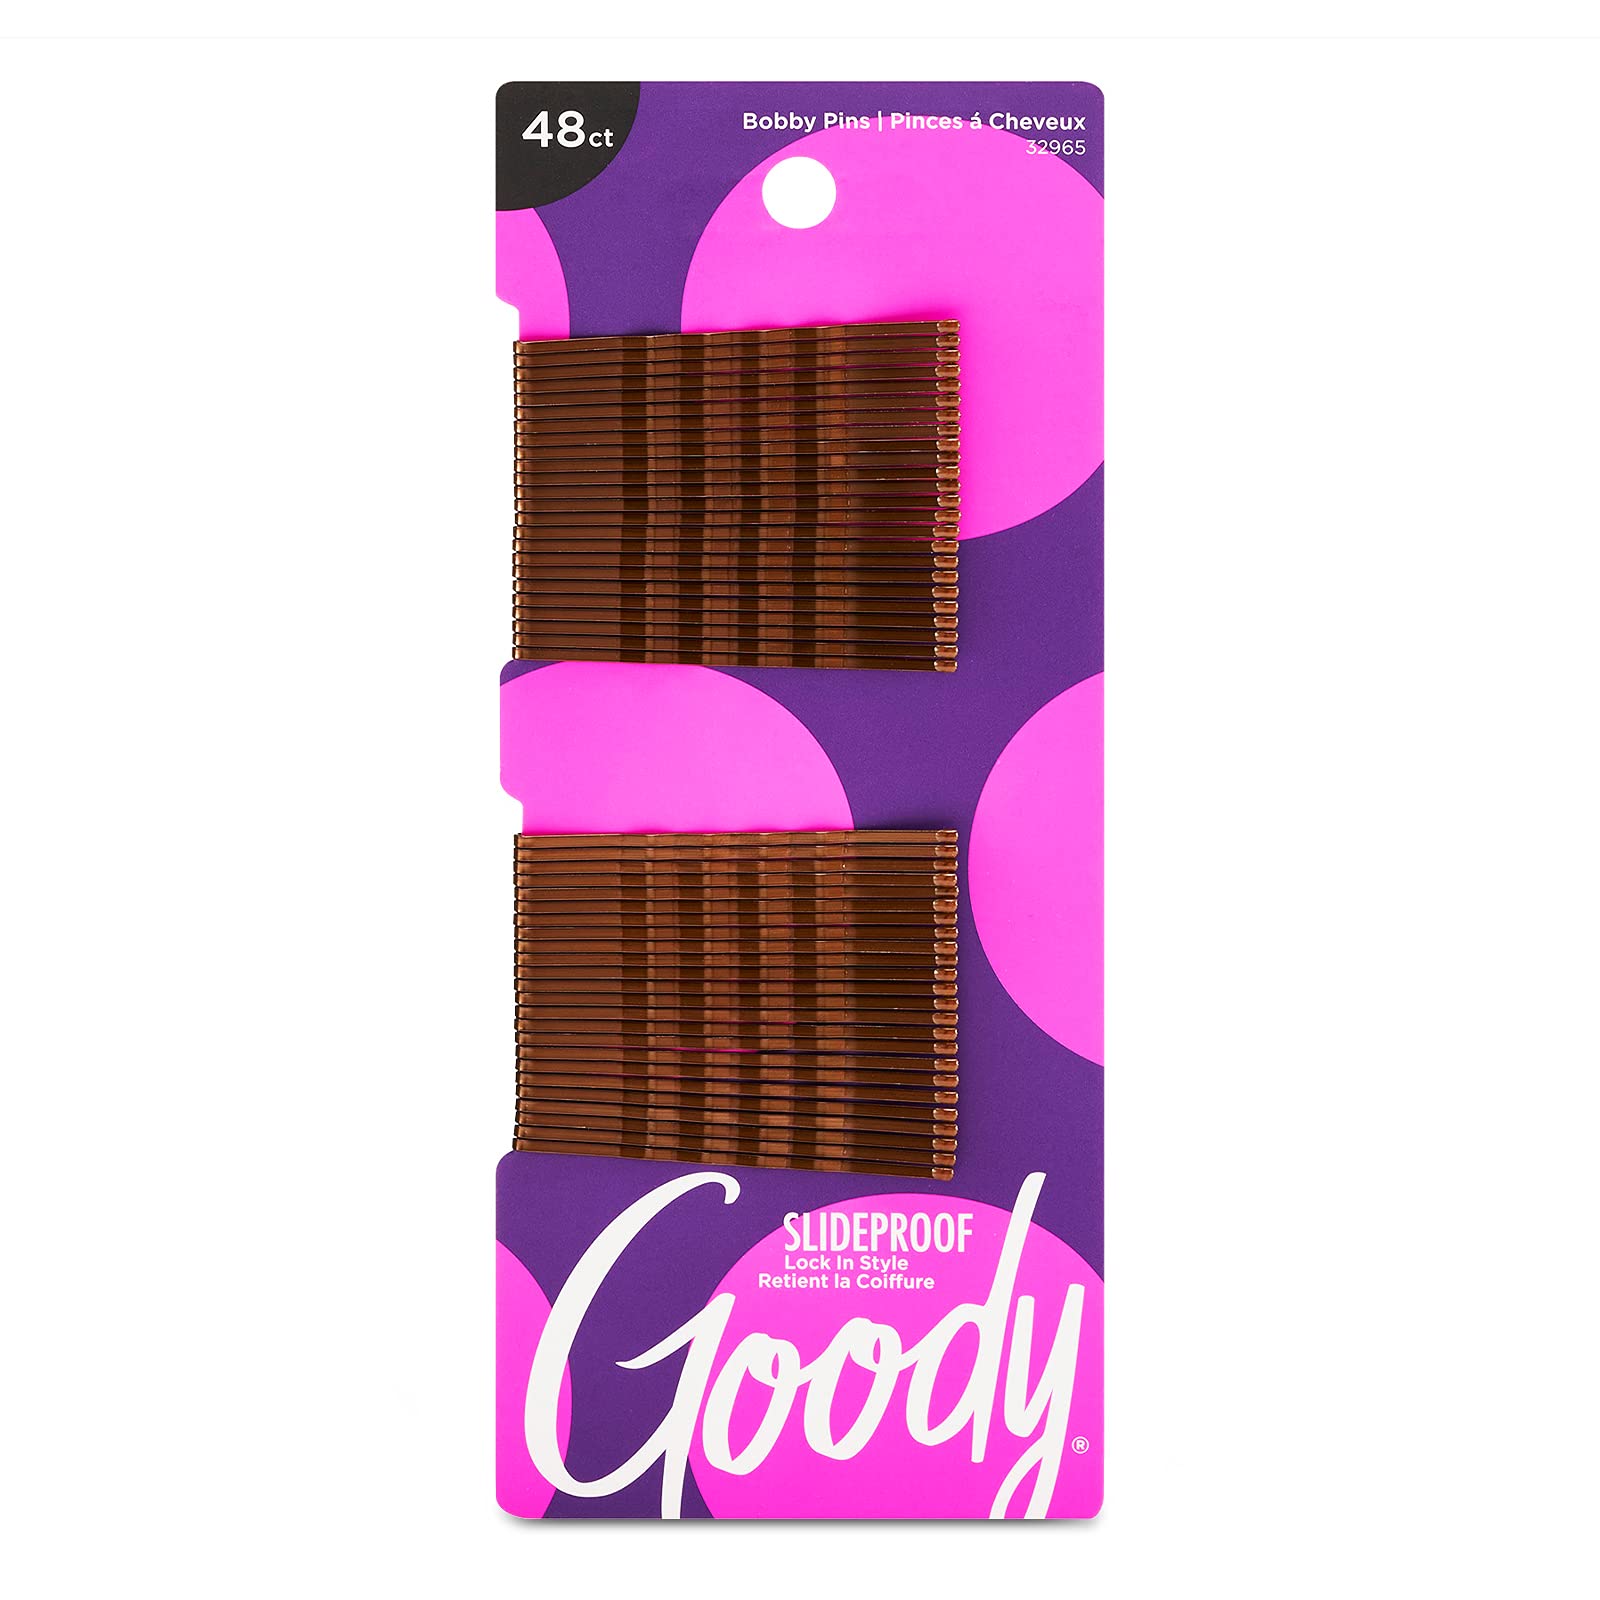 Goody Slideproof Womens Bobby Pin - 48 Count, Crimpled Brown - 2 Inch Pins  Help Keep Hairs In Place - Hair Accessories to Style With Ease and Keep  Your Hair Secured 